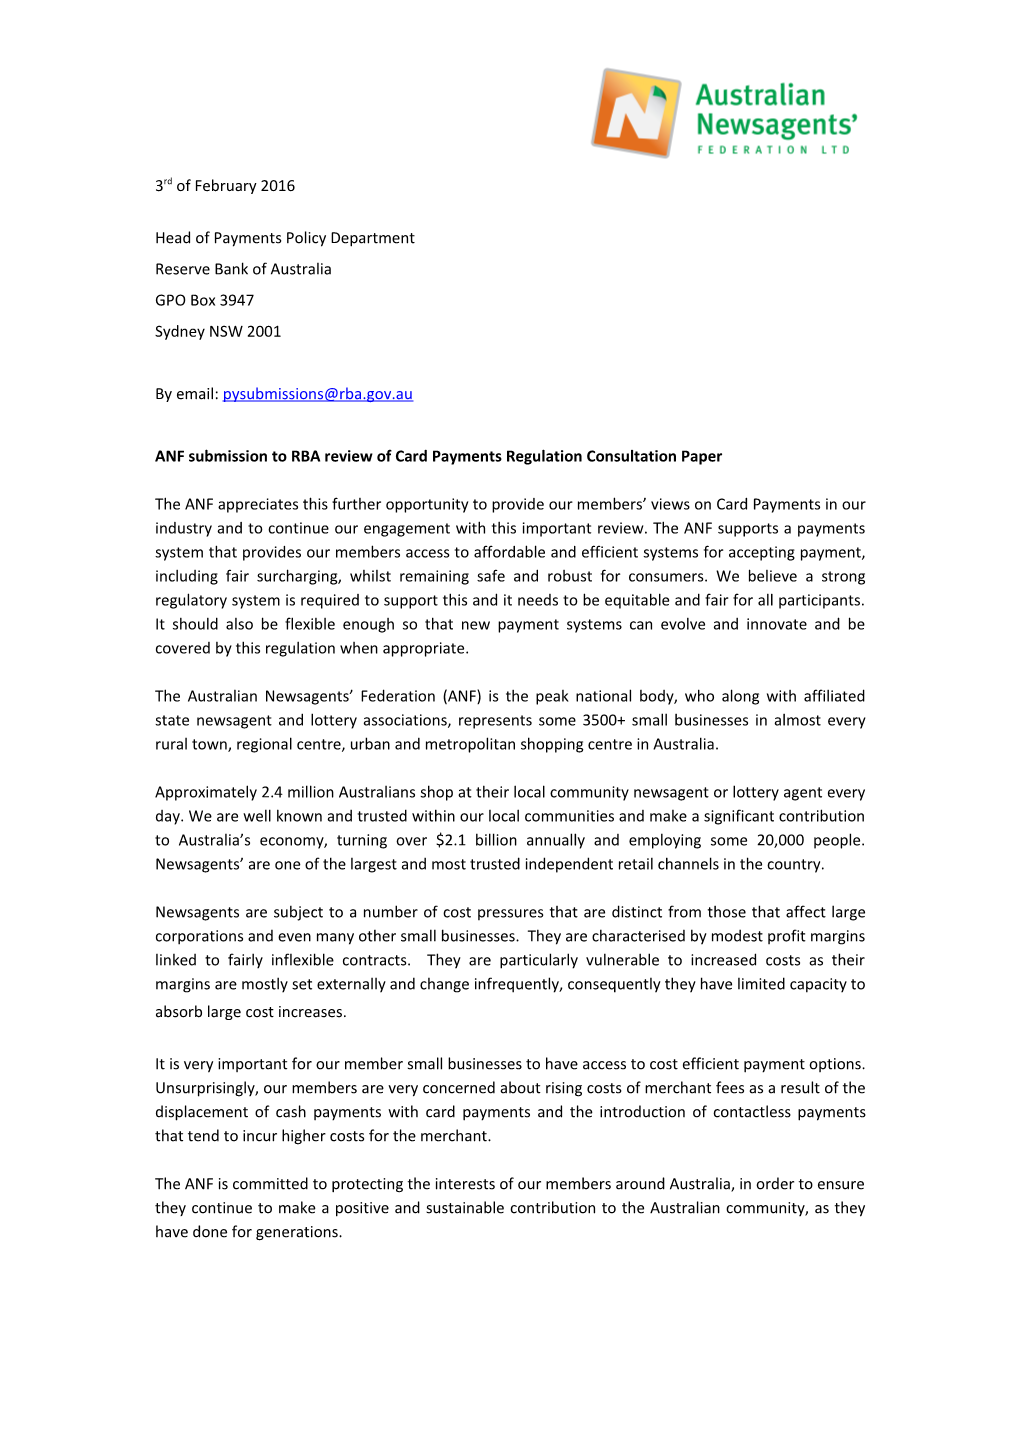 ANF Submission to RBA Review of Card Payments Regulation Consultation Paper